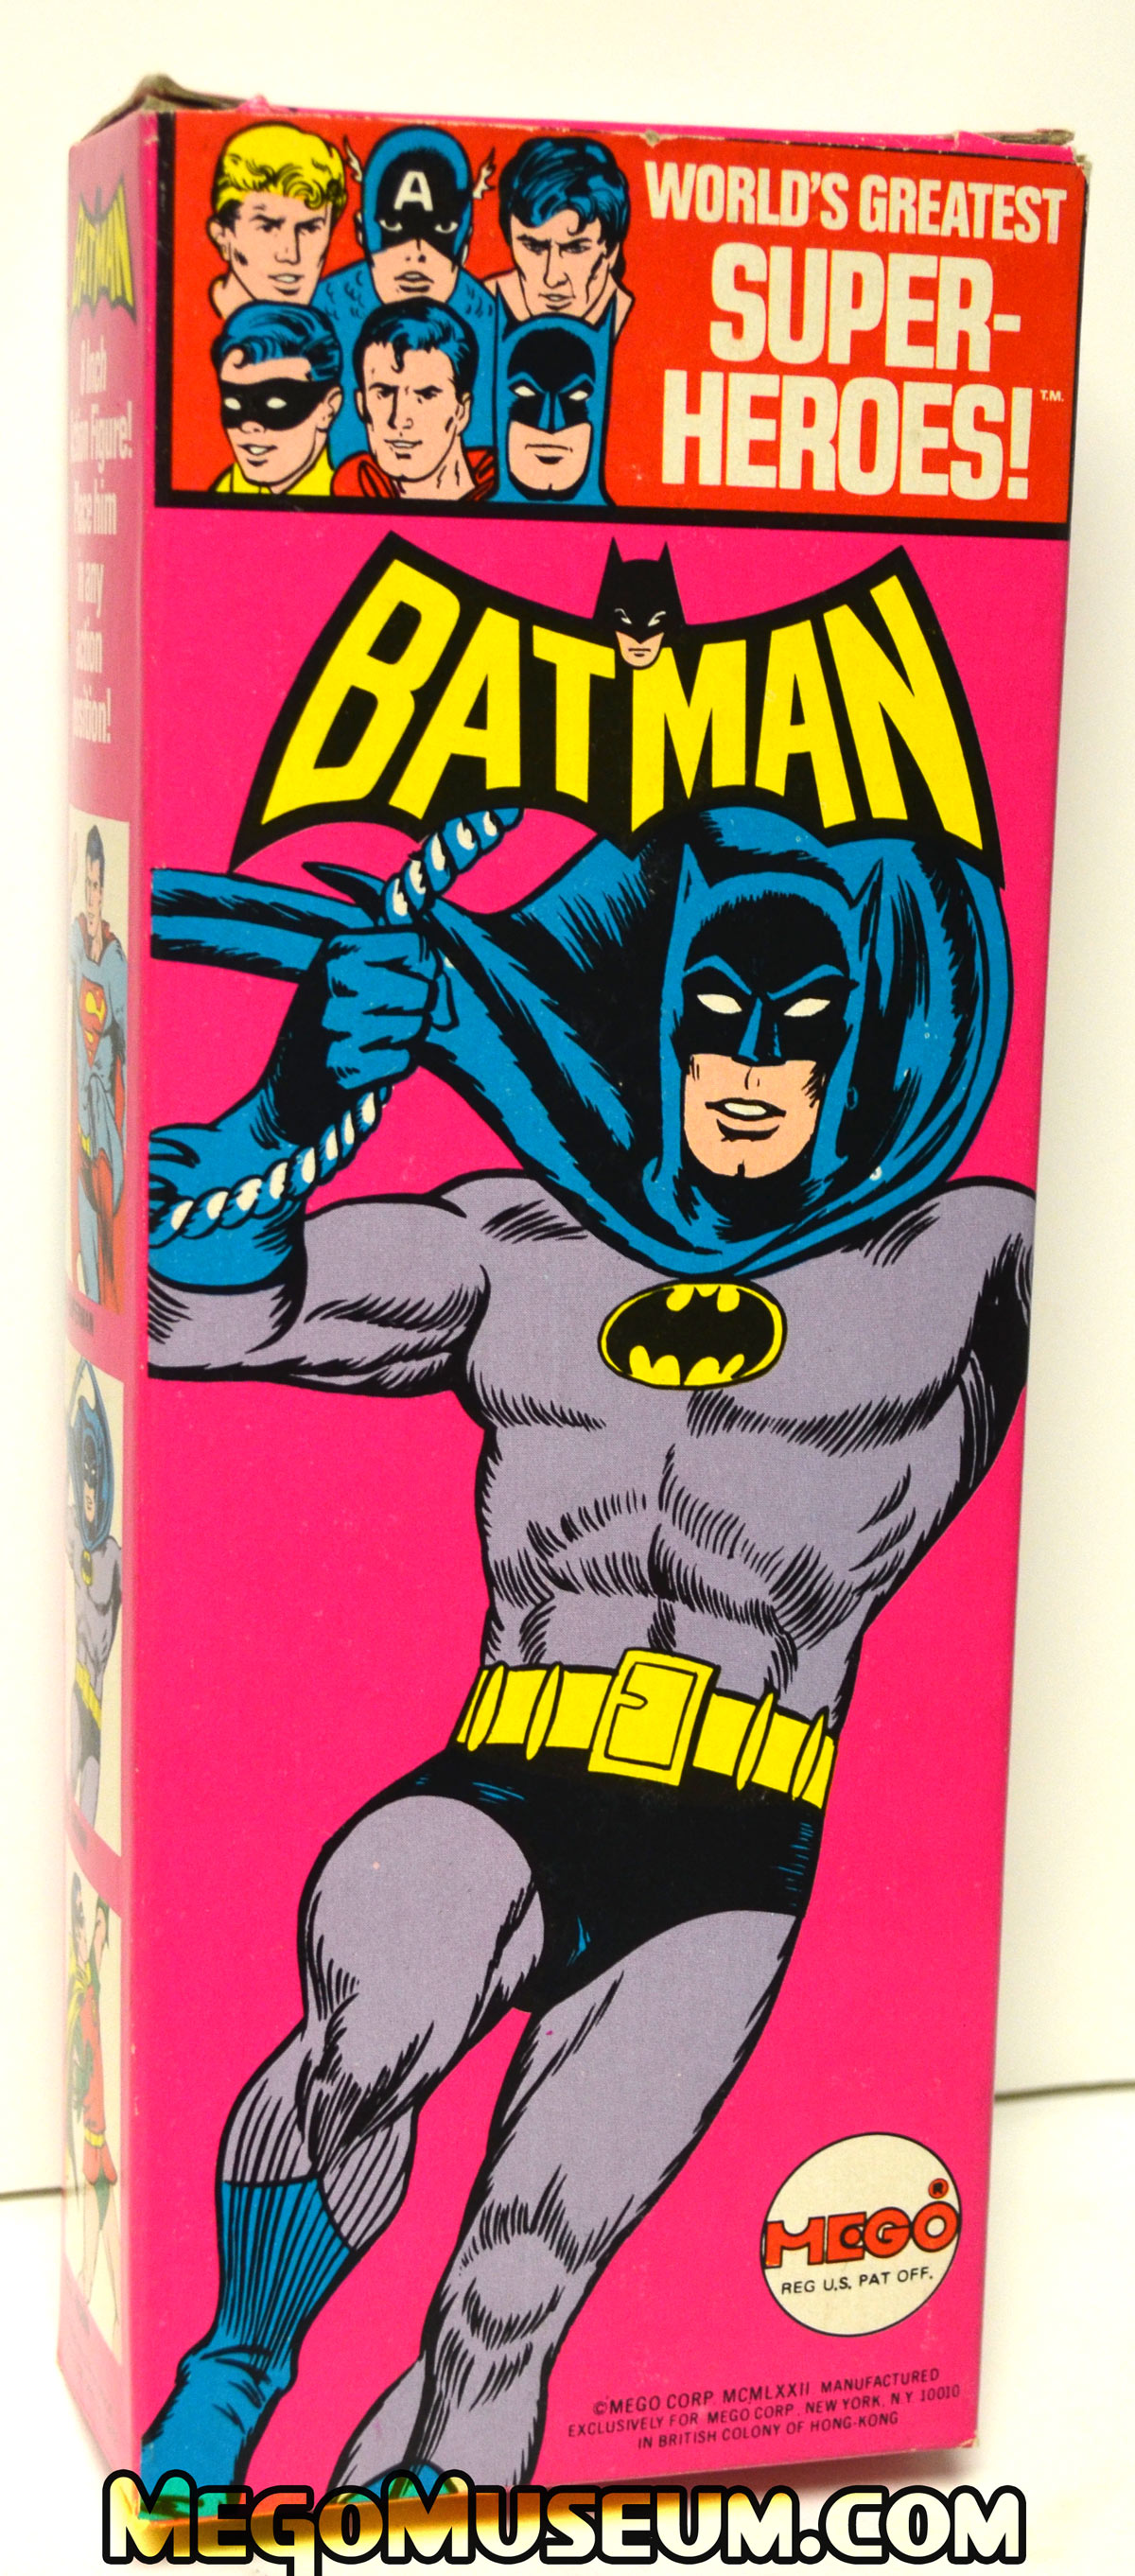 Mego Solid Boxed Batman from 1973